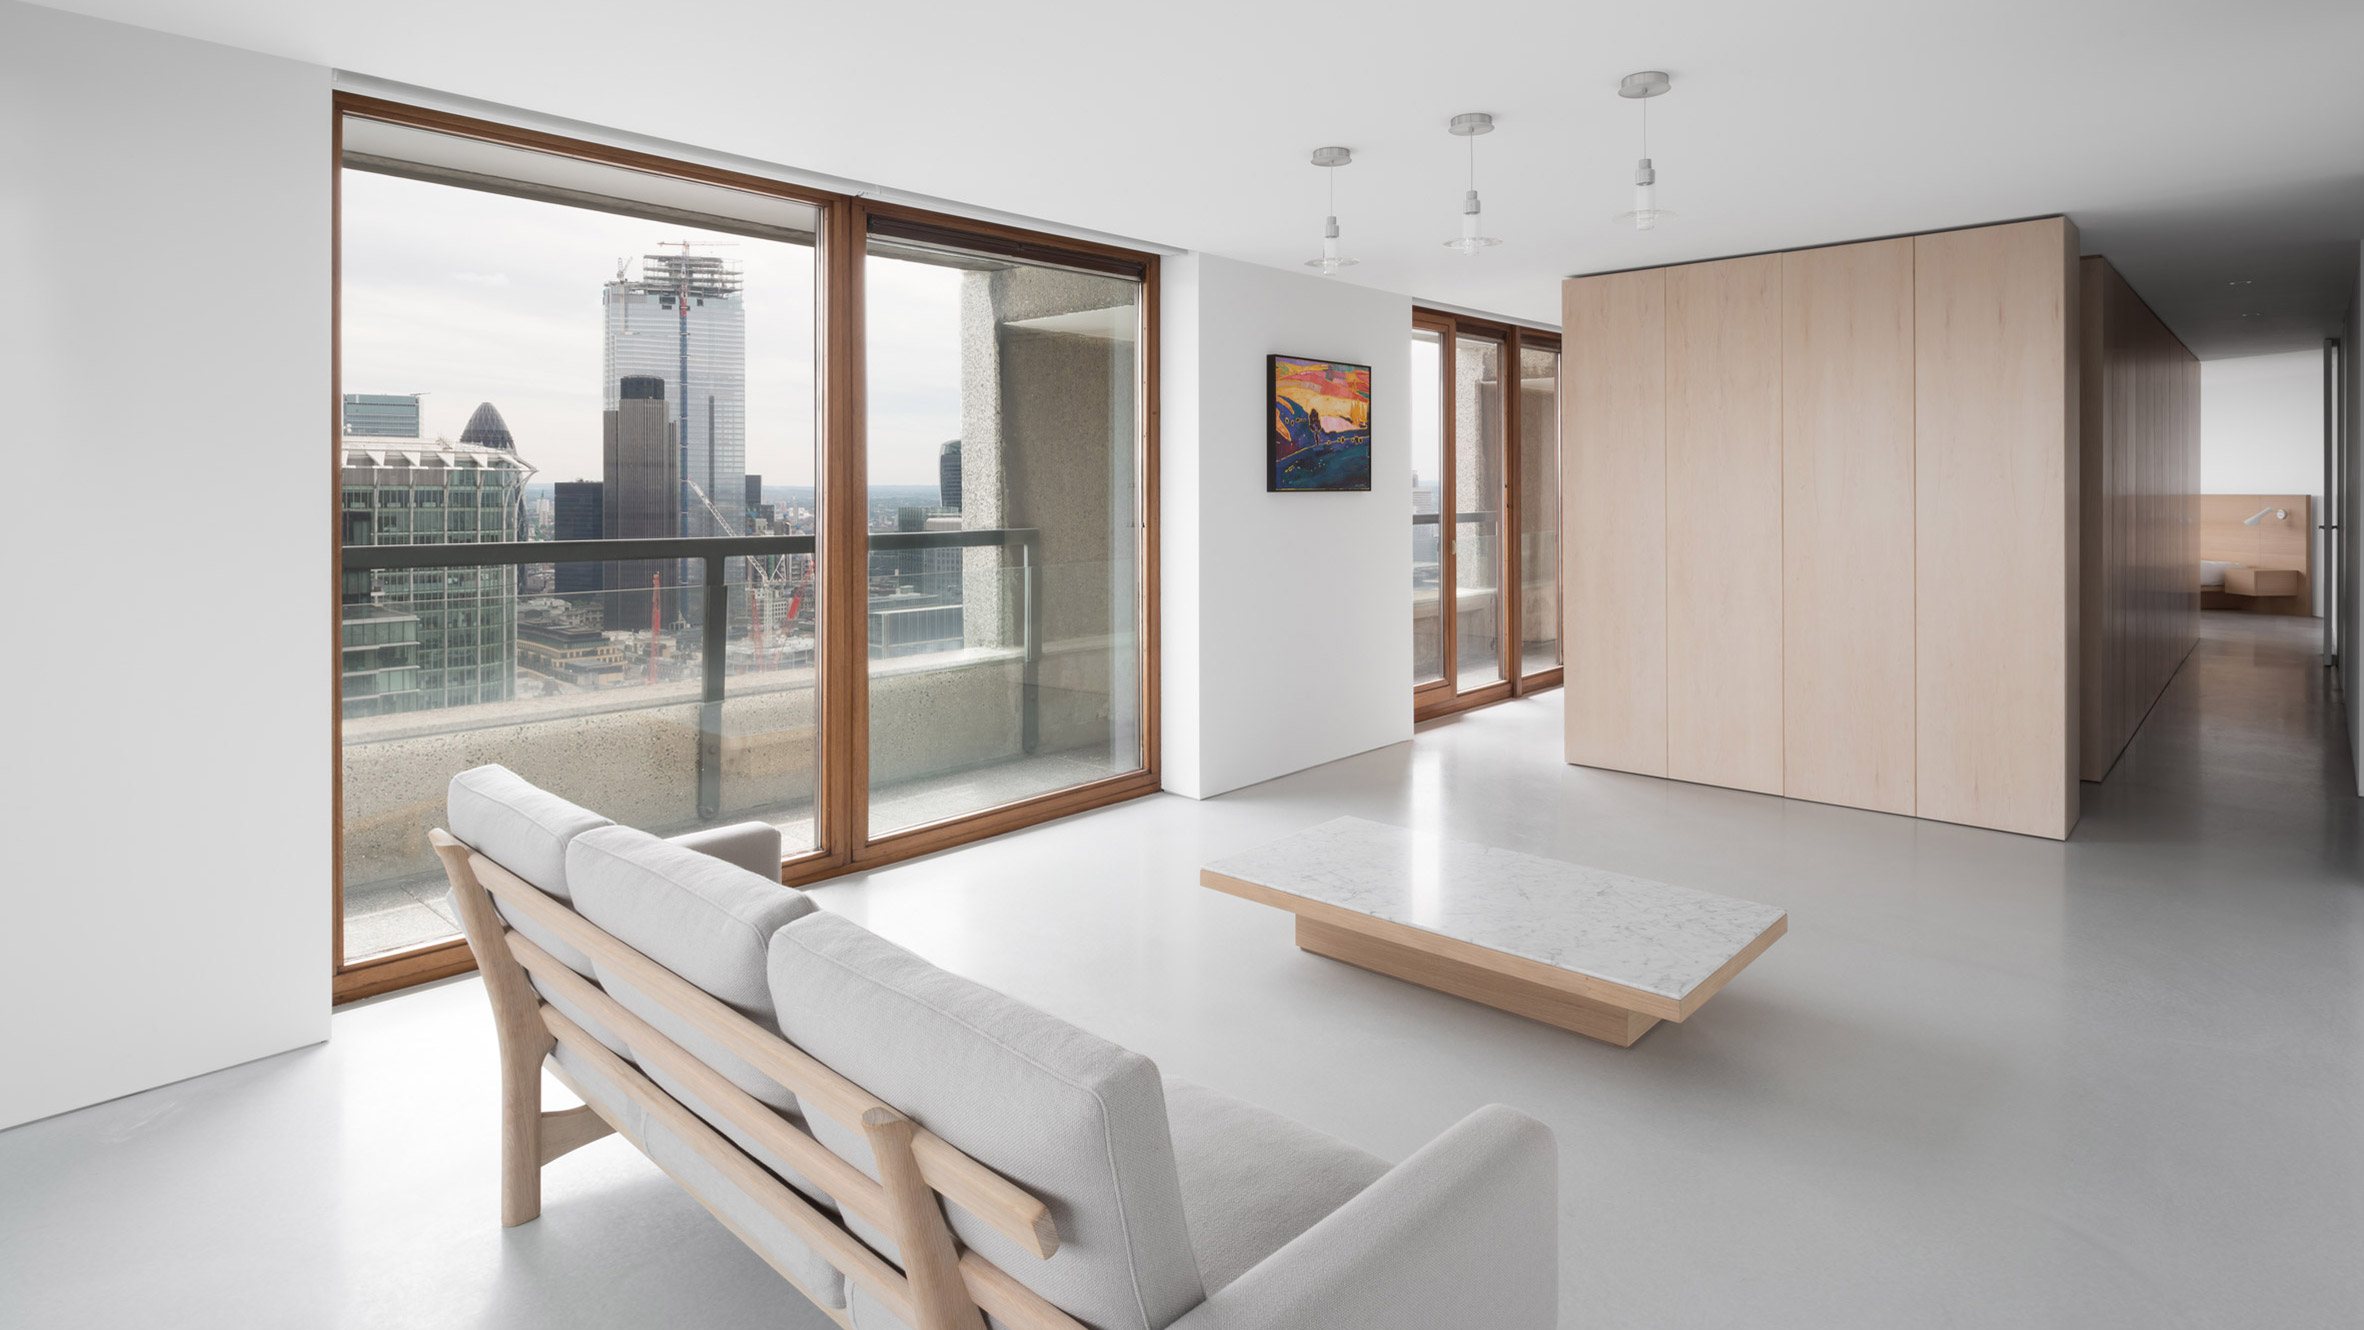 John Pawson pares back Barbican apartment to "a state of emptiness"